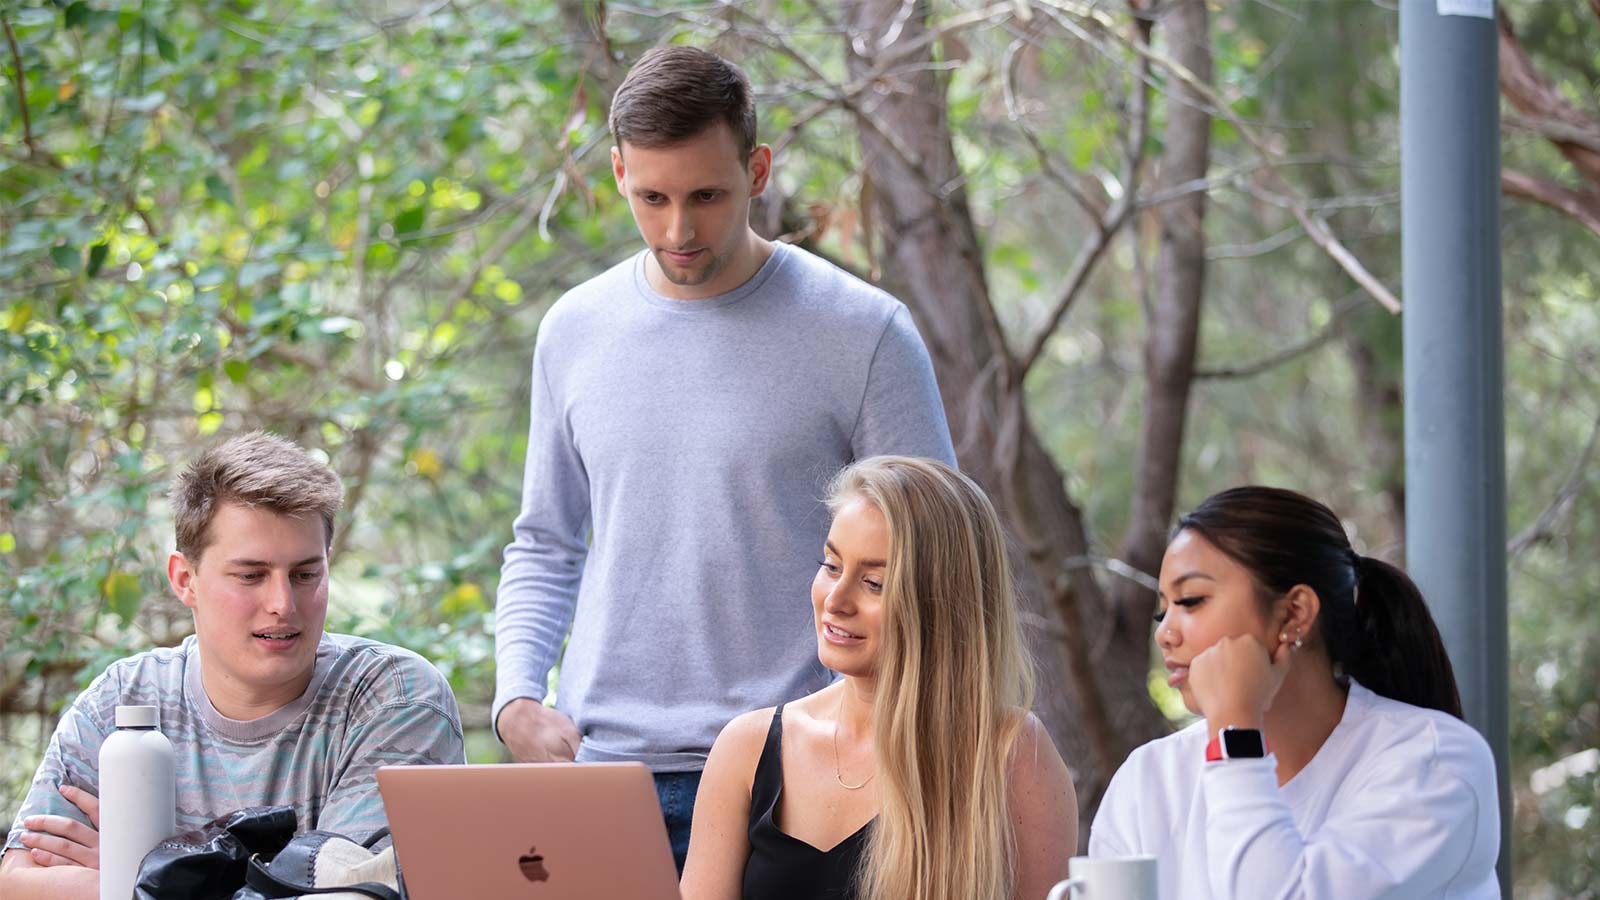 Three students are seated at an outdoor table looking at a laptop. There is a student standing behind them looking down at the laptop. There are green trees inn the background.